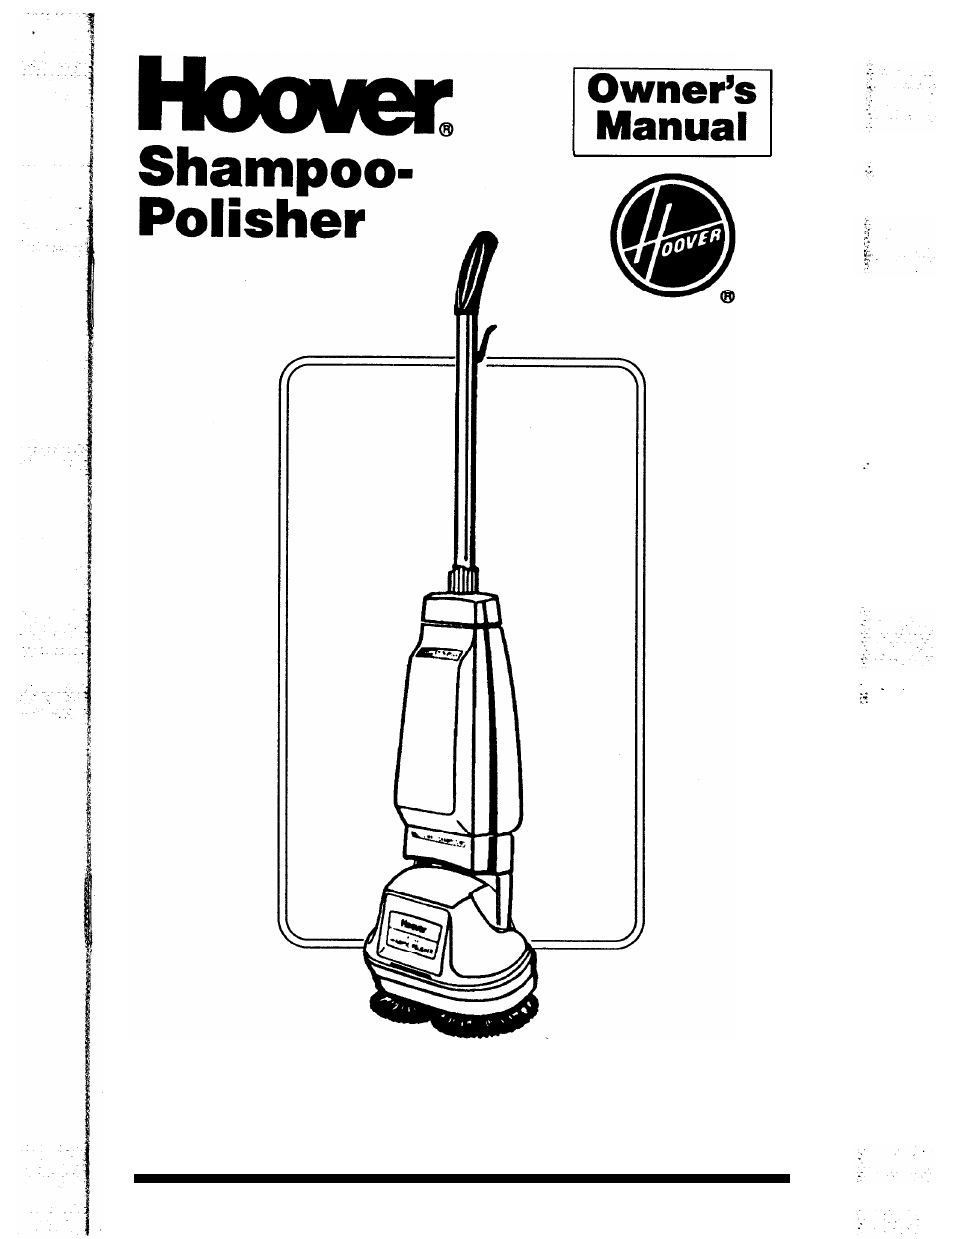 Hoover Shampoo- Polisher User Manual | 22 pages